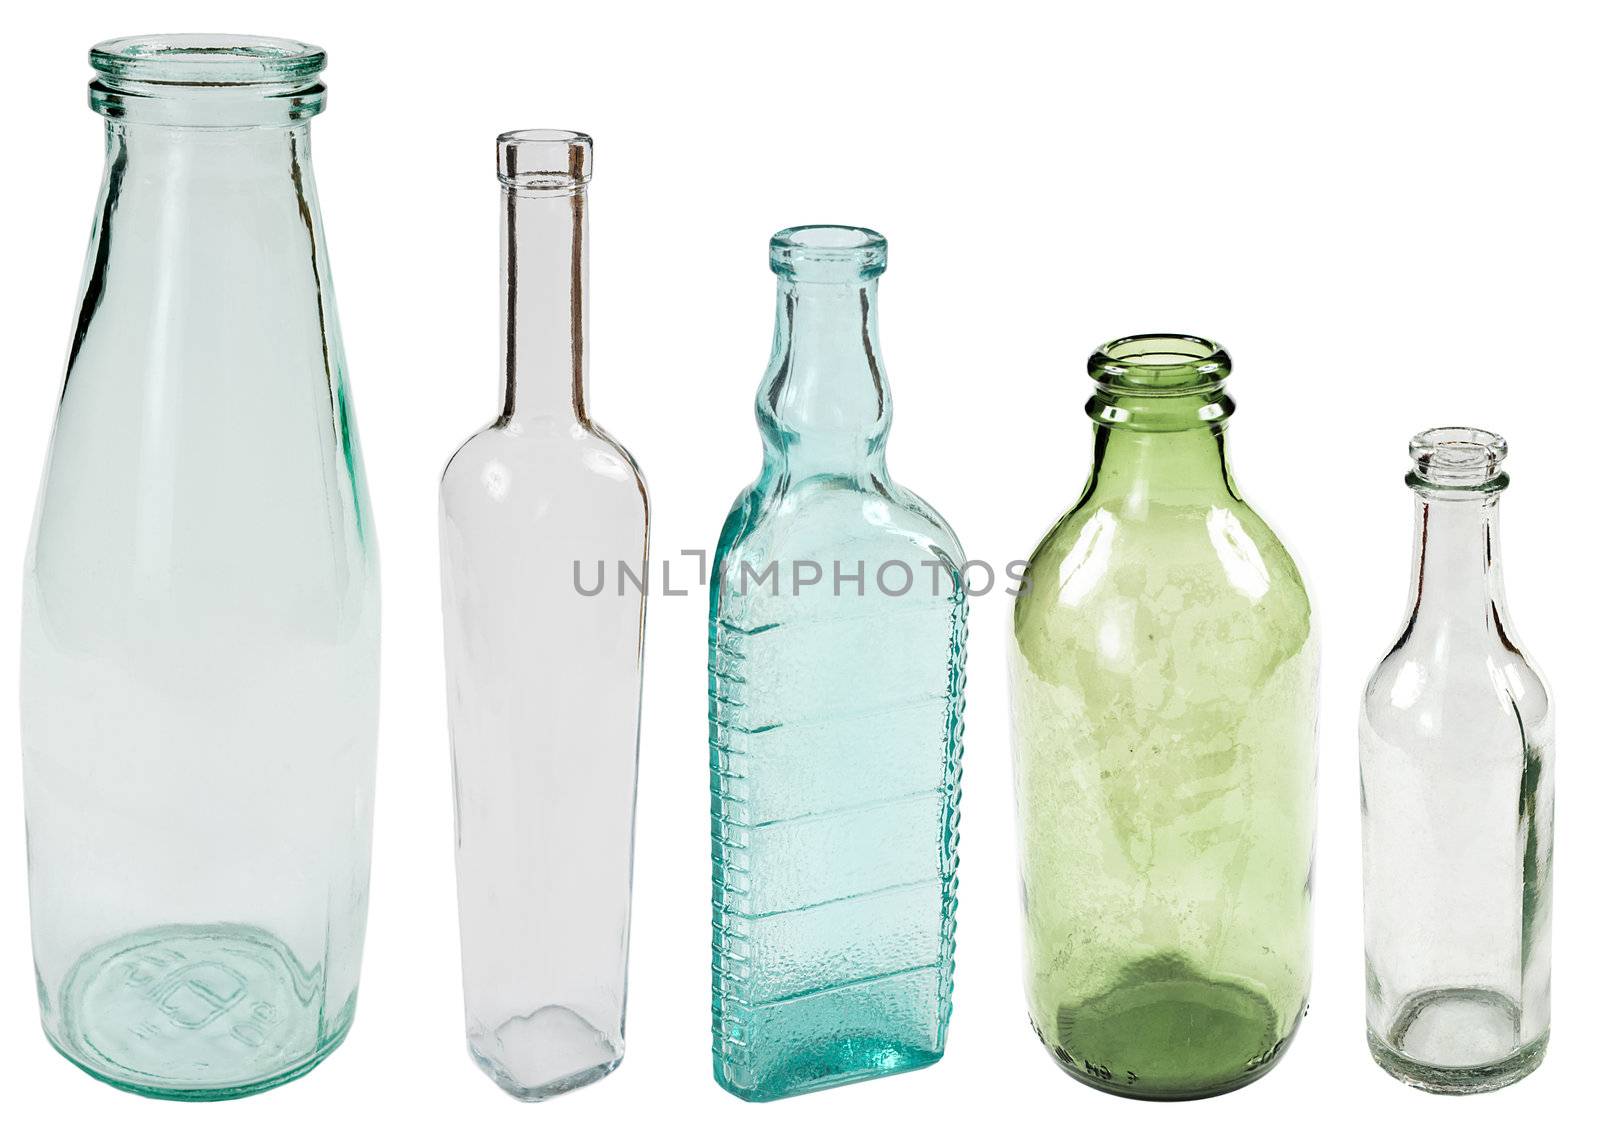 Group of bottles by pzaxe